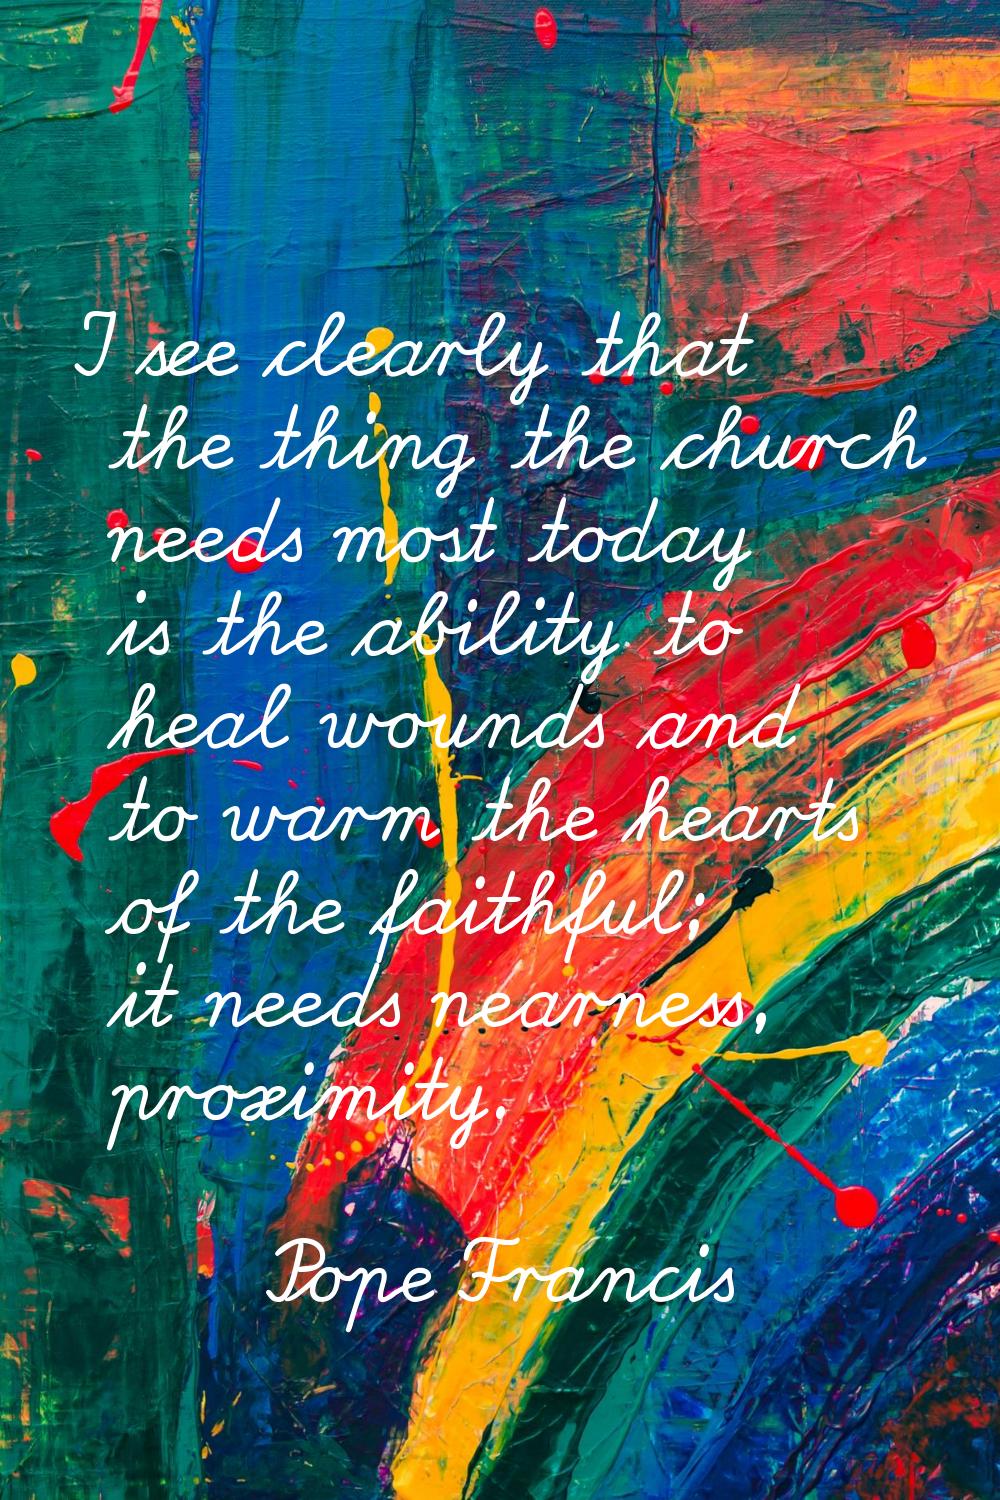 I see clearly that the thing the church needs most today is the ability to heal wounds and to warm 